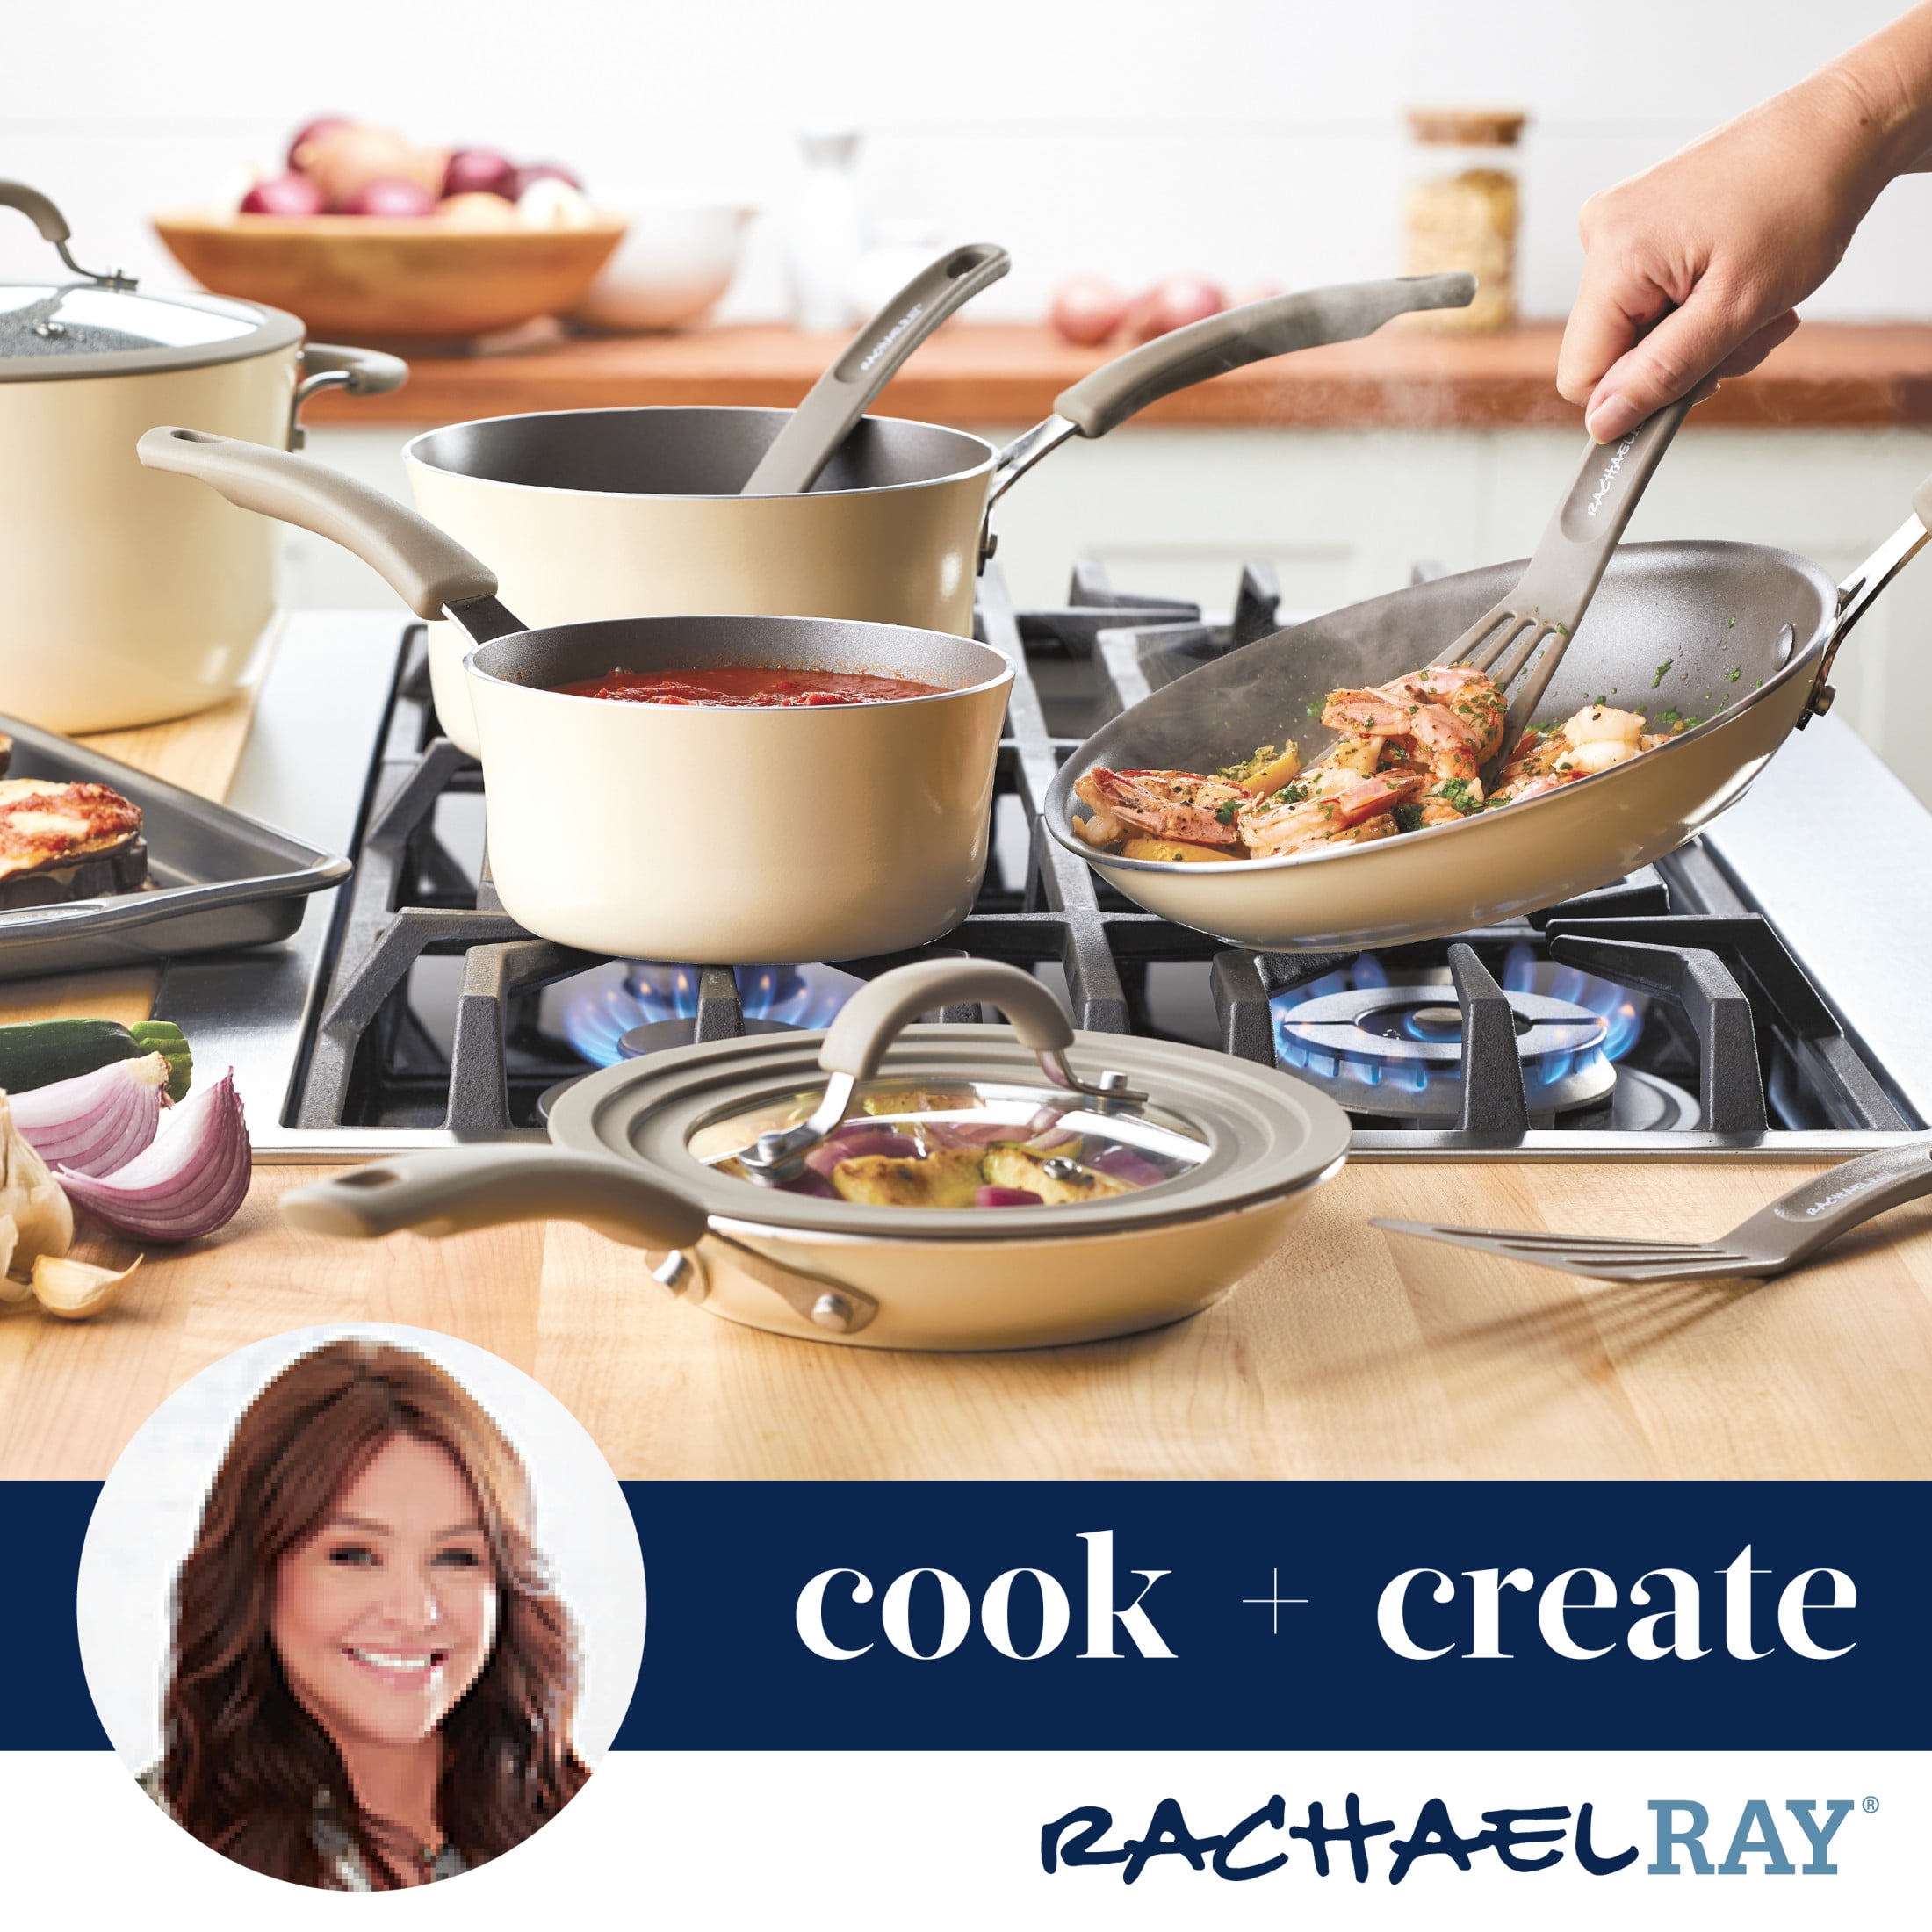 Rachael Ray Cook + Create Hard Anodized Nonstick Cookware Set, 11 Piece